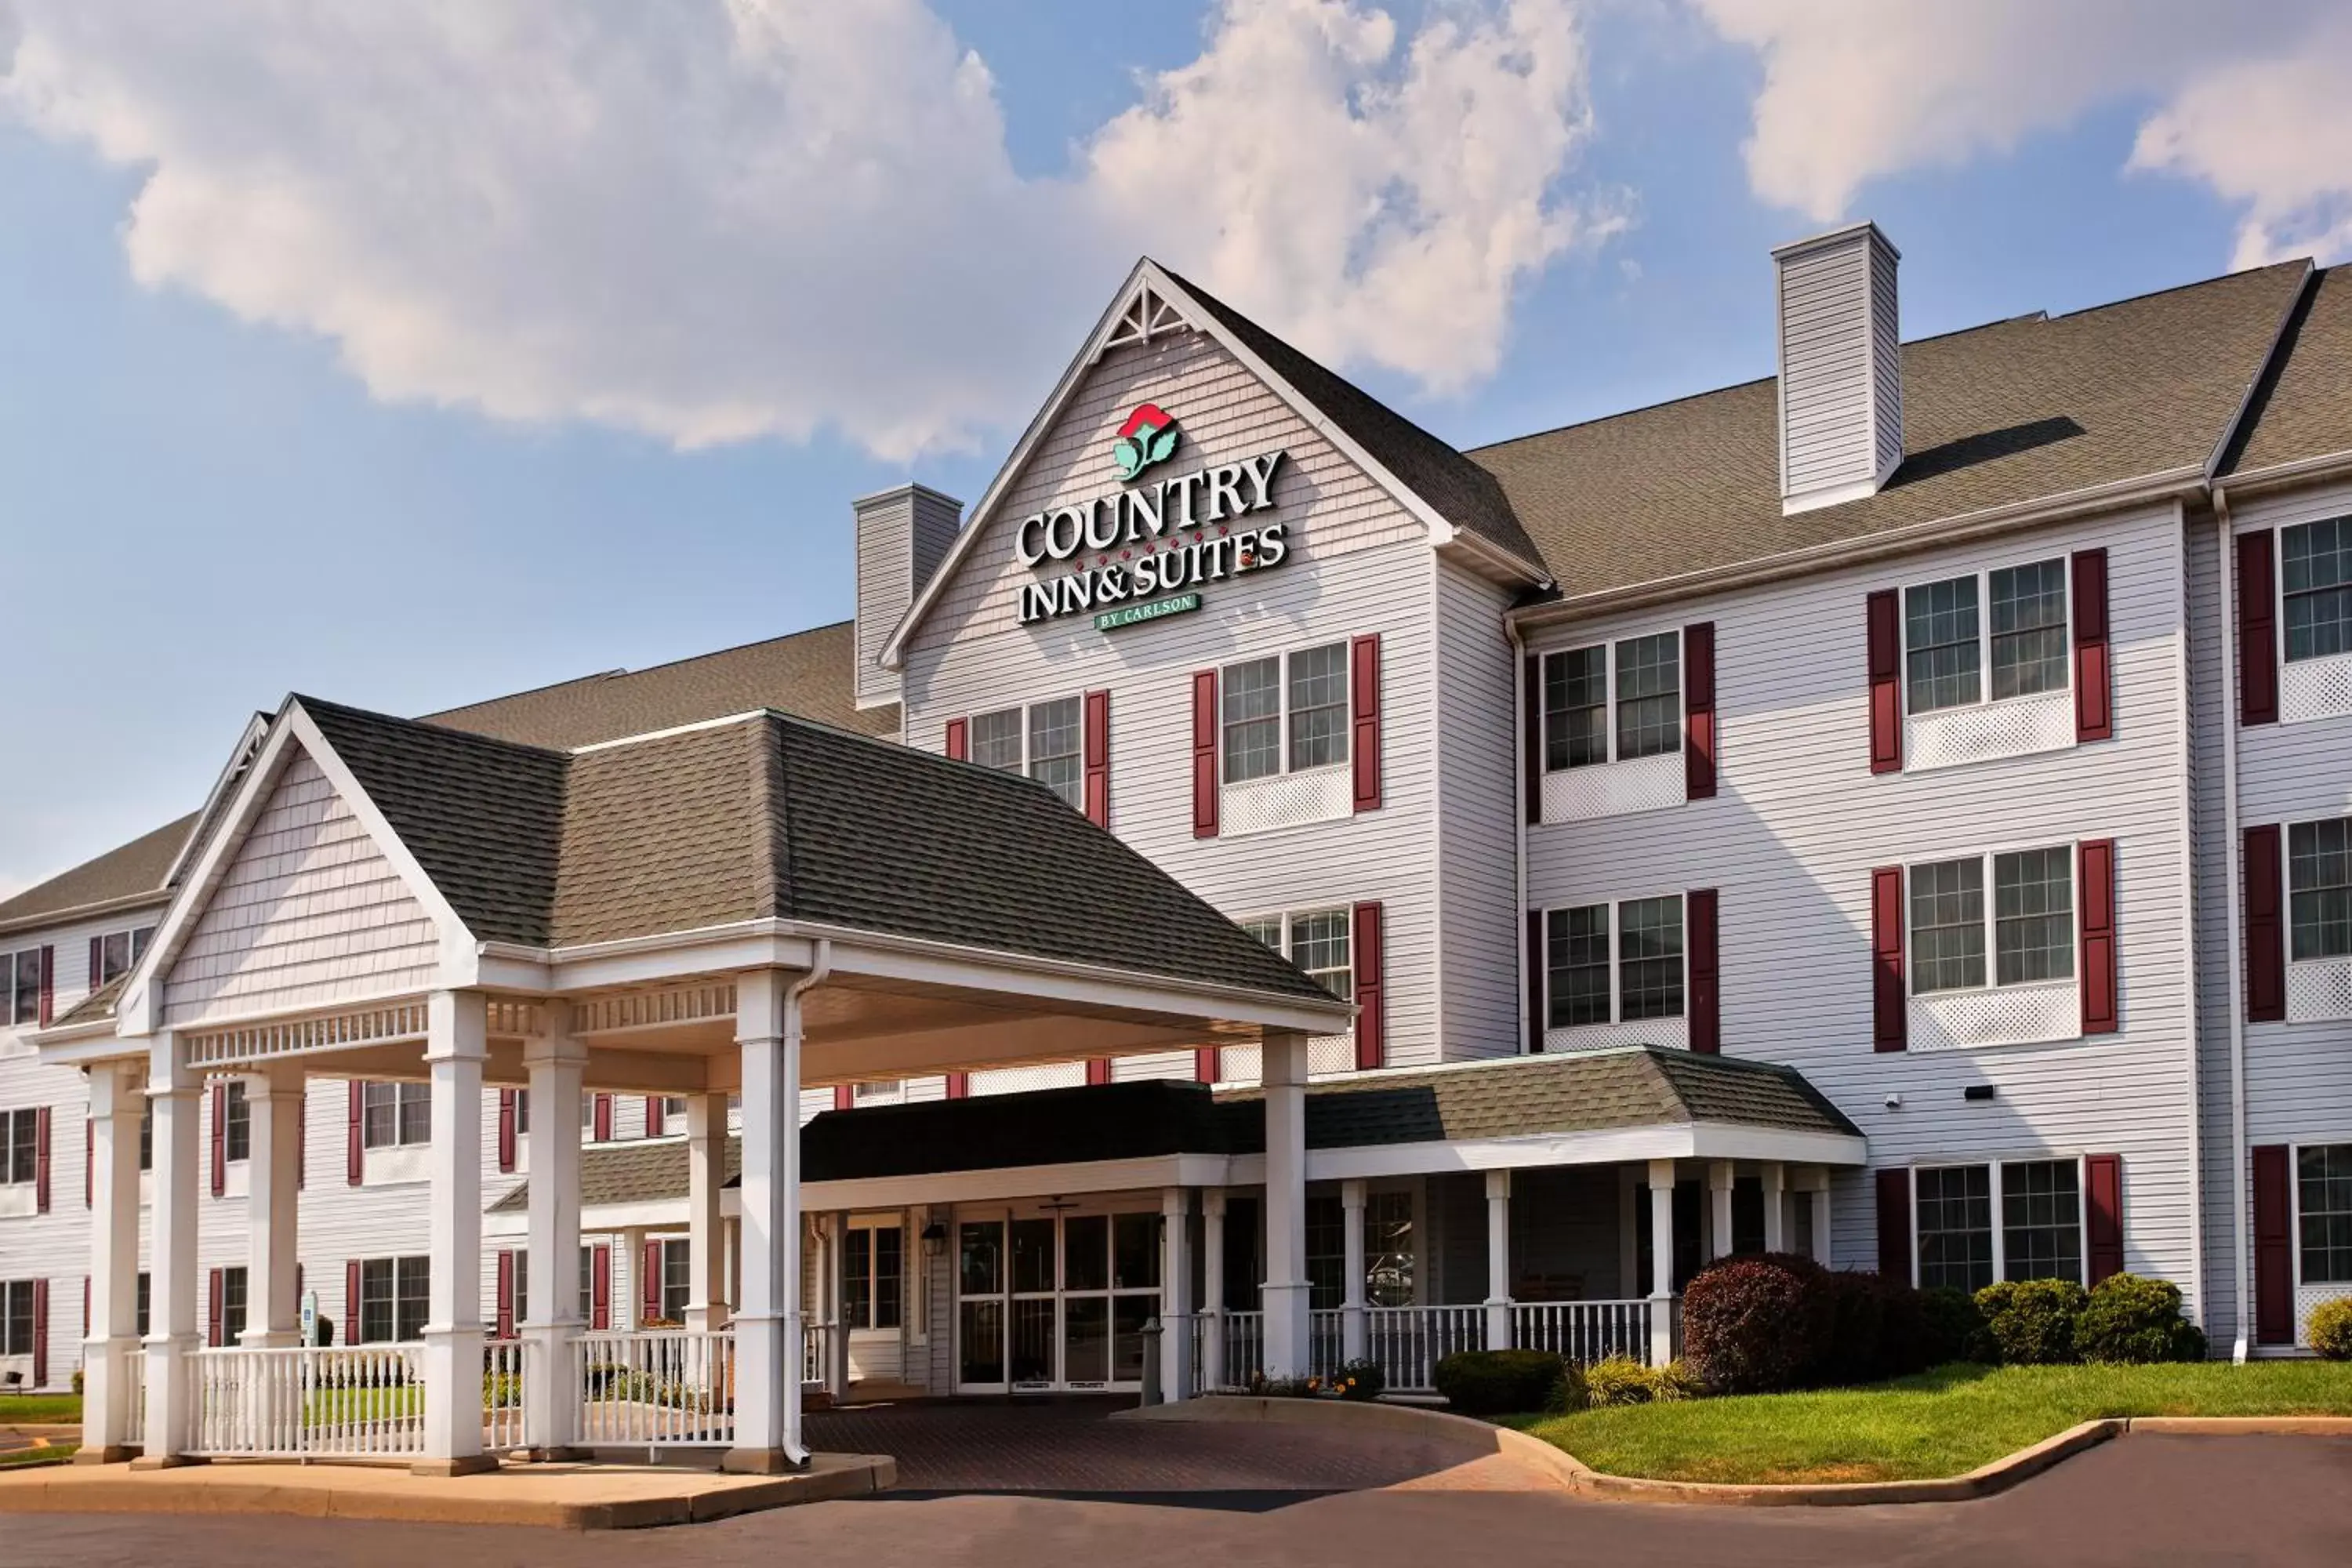 Facade/entrance, Property Building in Country Inn & Suites by Radisson, Rock Falls, IL